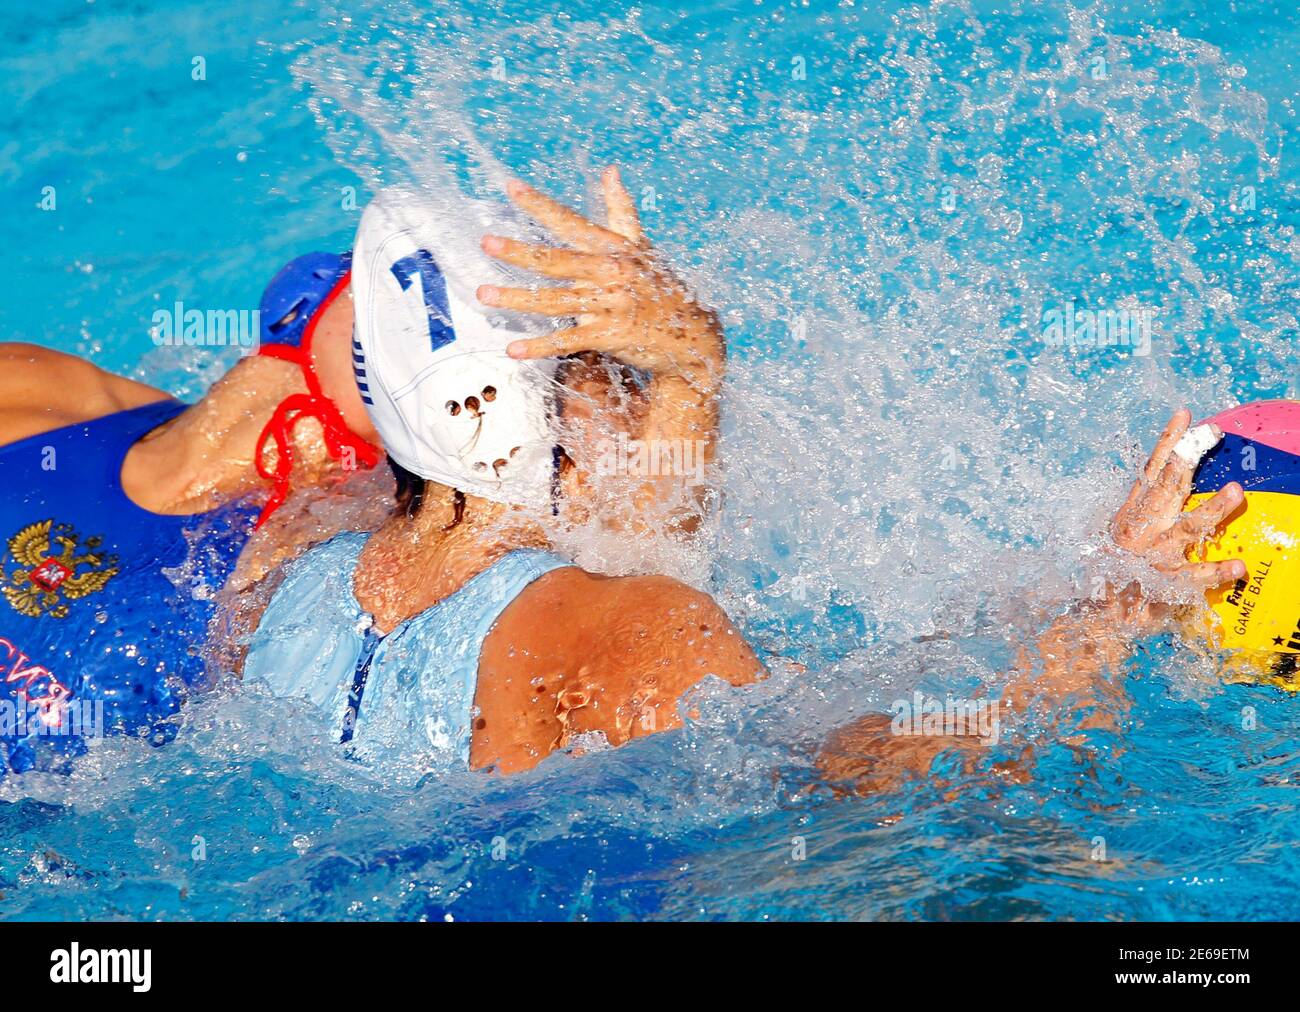 Alexandra Polo High Resolution Stock Photography and Images - Alamy